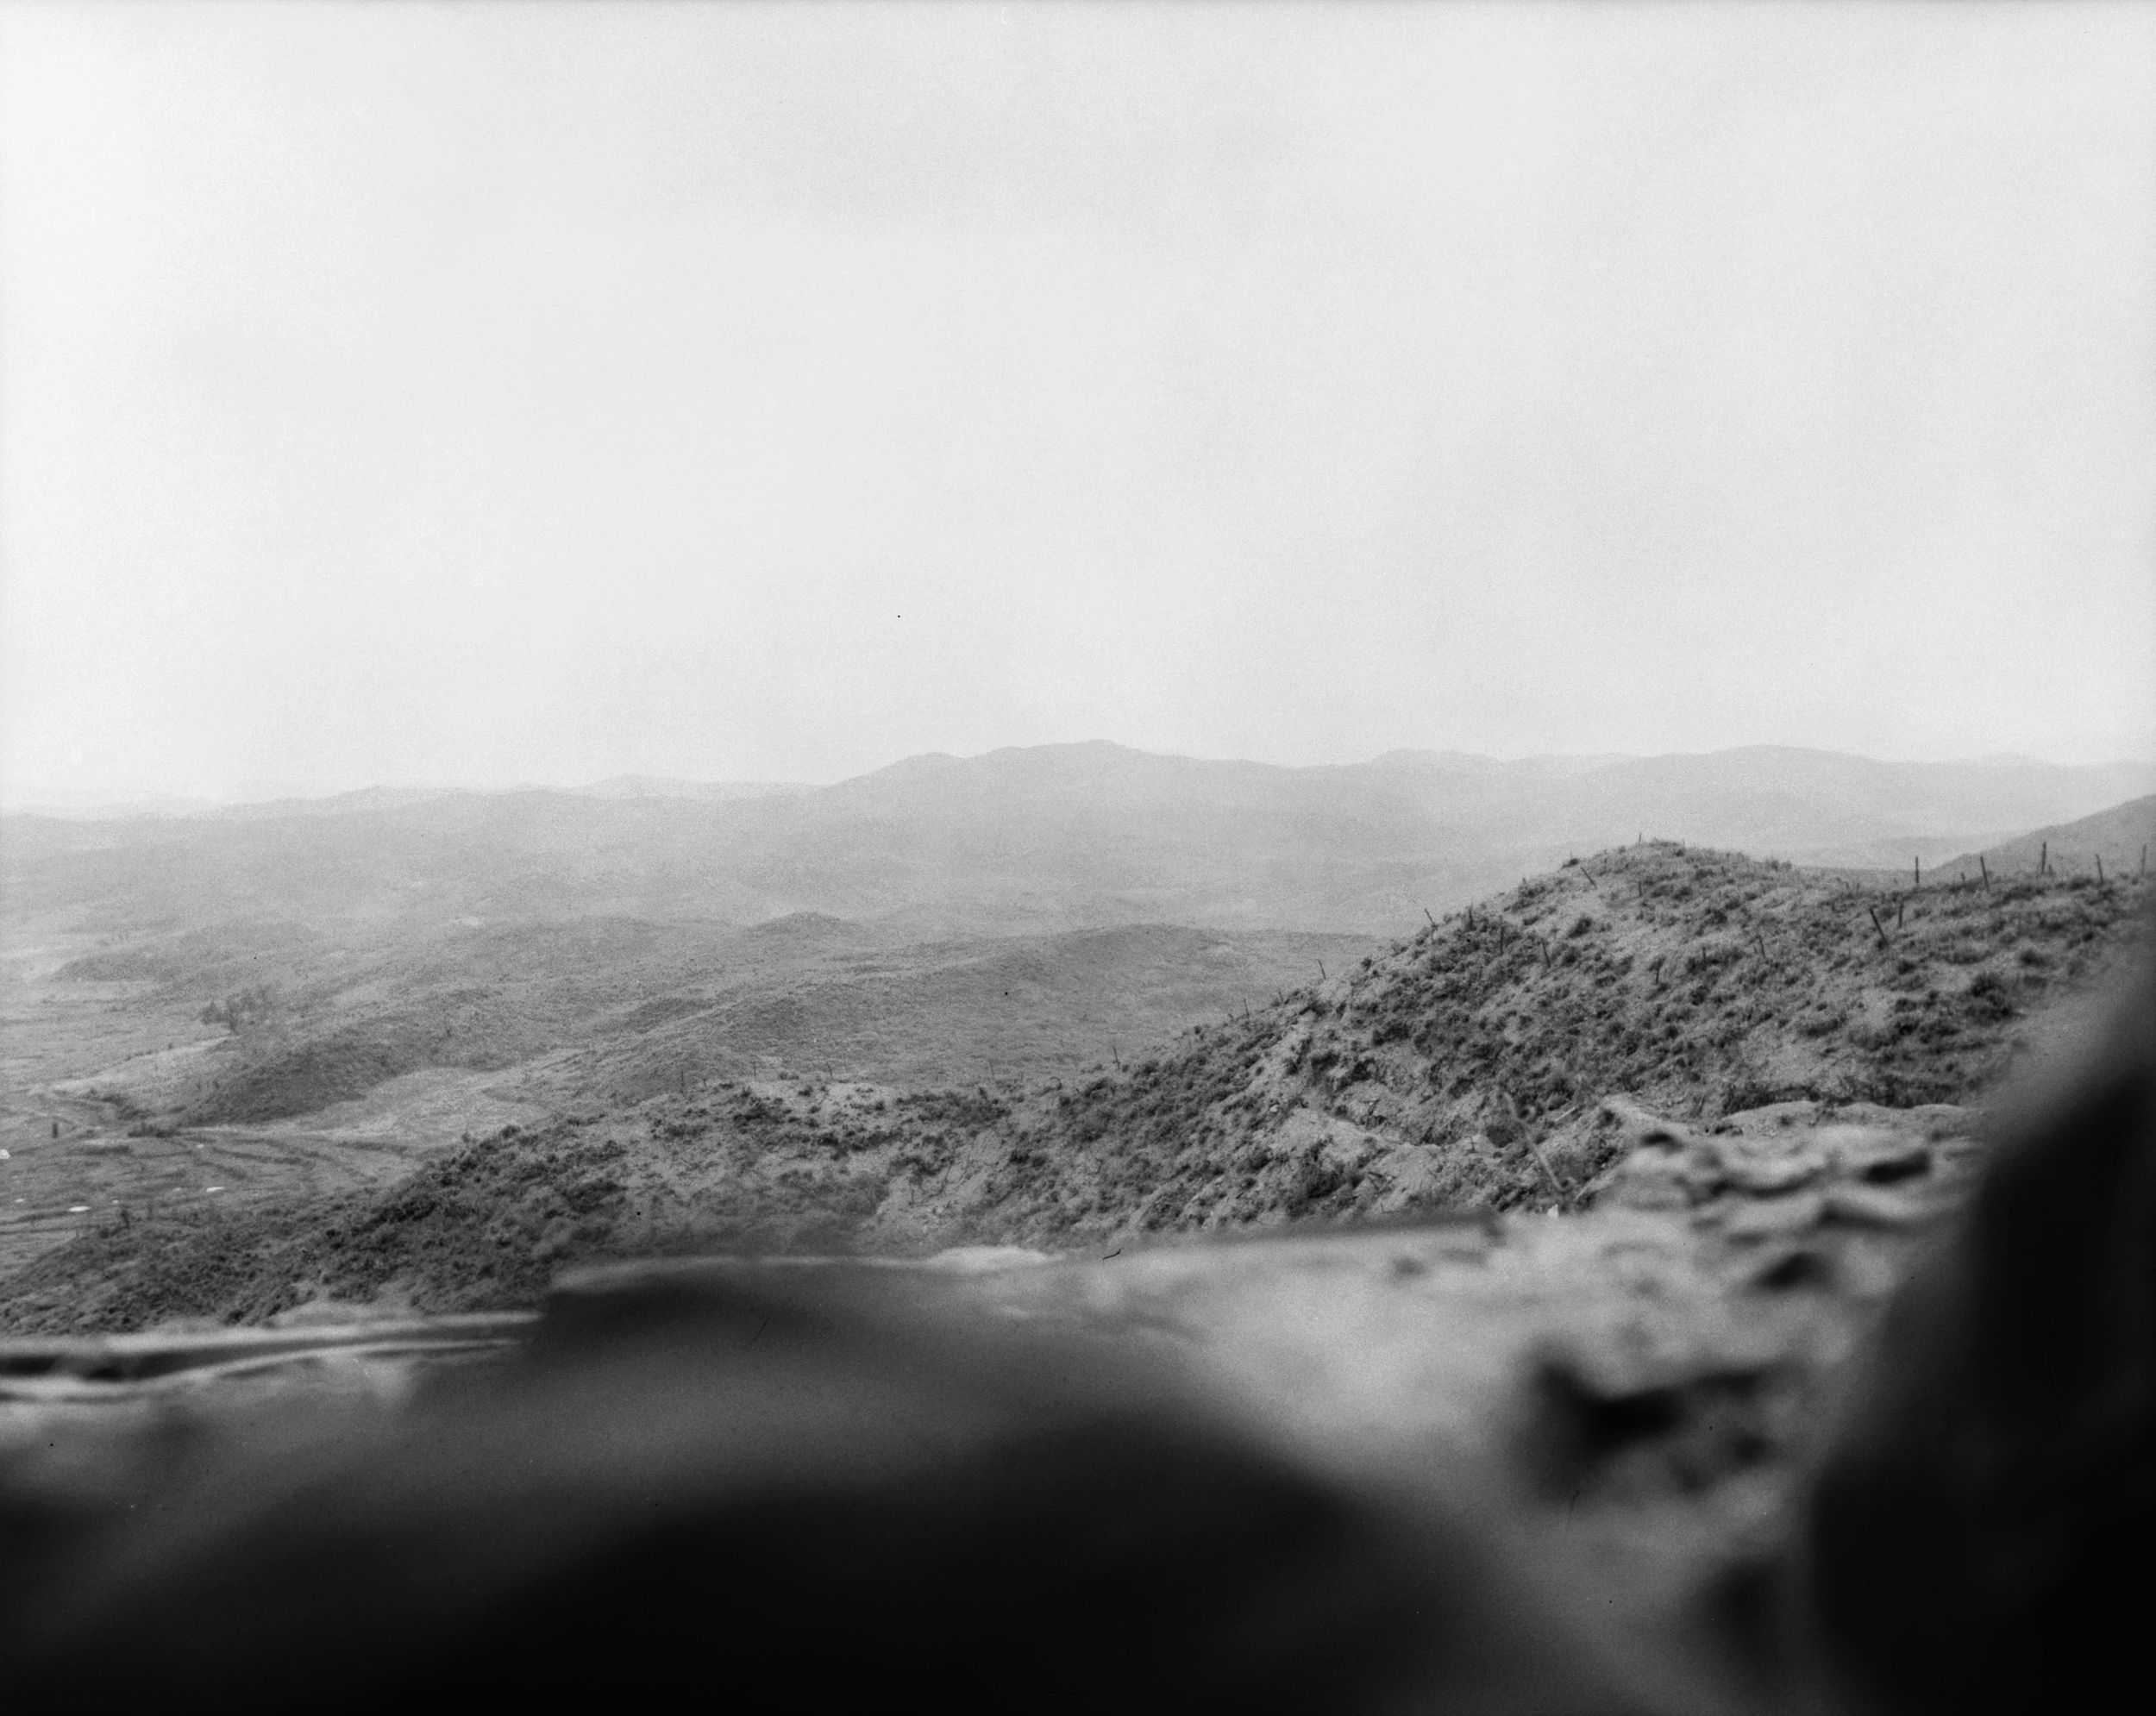 Chinese positions in the Forward Platoon area of the Hook, looking due east. The grass-tufted ridge in the foreground is Ronson Run, which connected enemy positions in the Hook. 